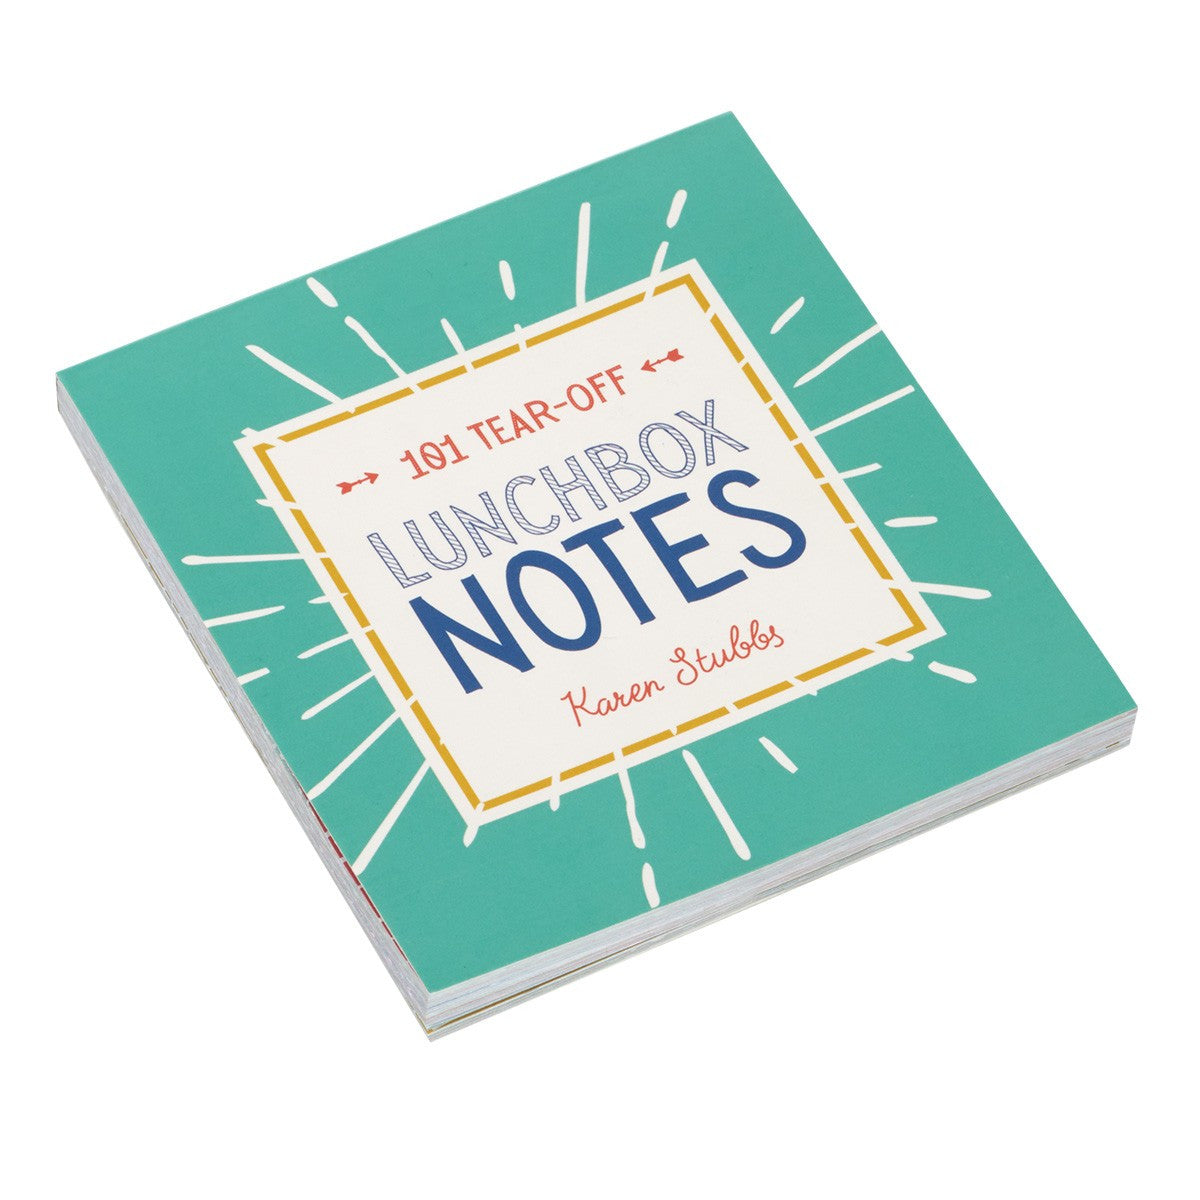 101 Lunchbox Notes